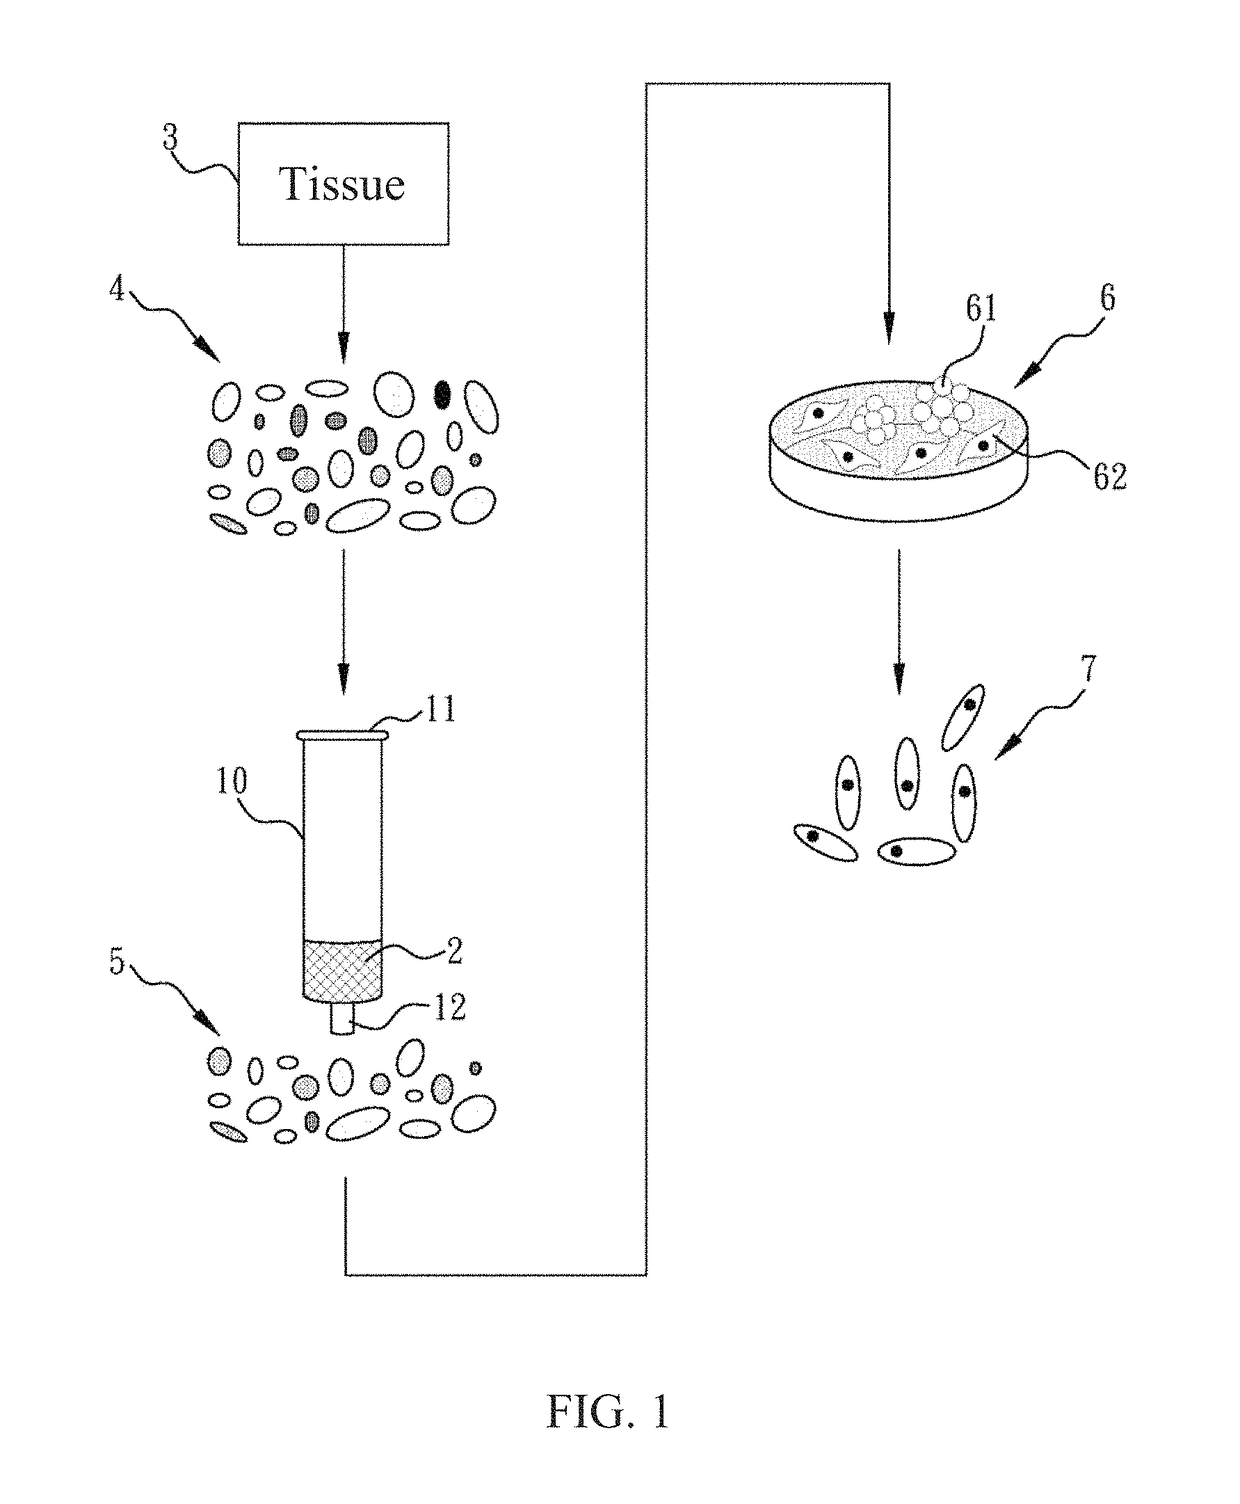 Method of obtaining high purity stem cells from tissue